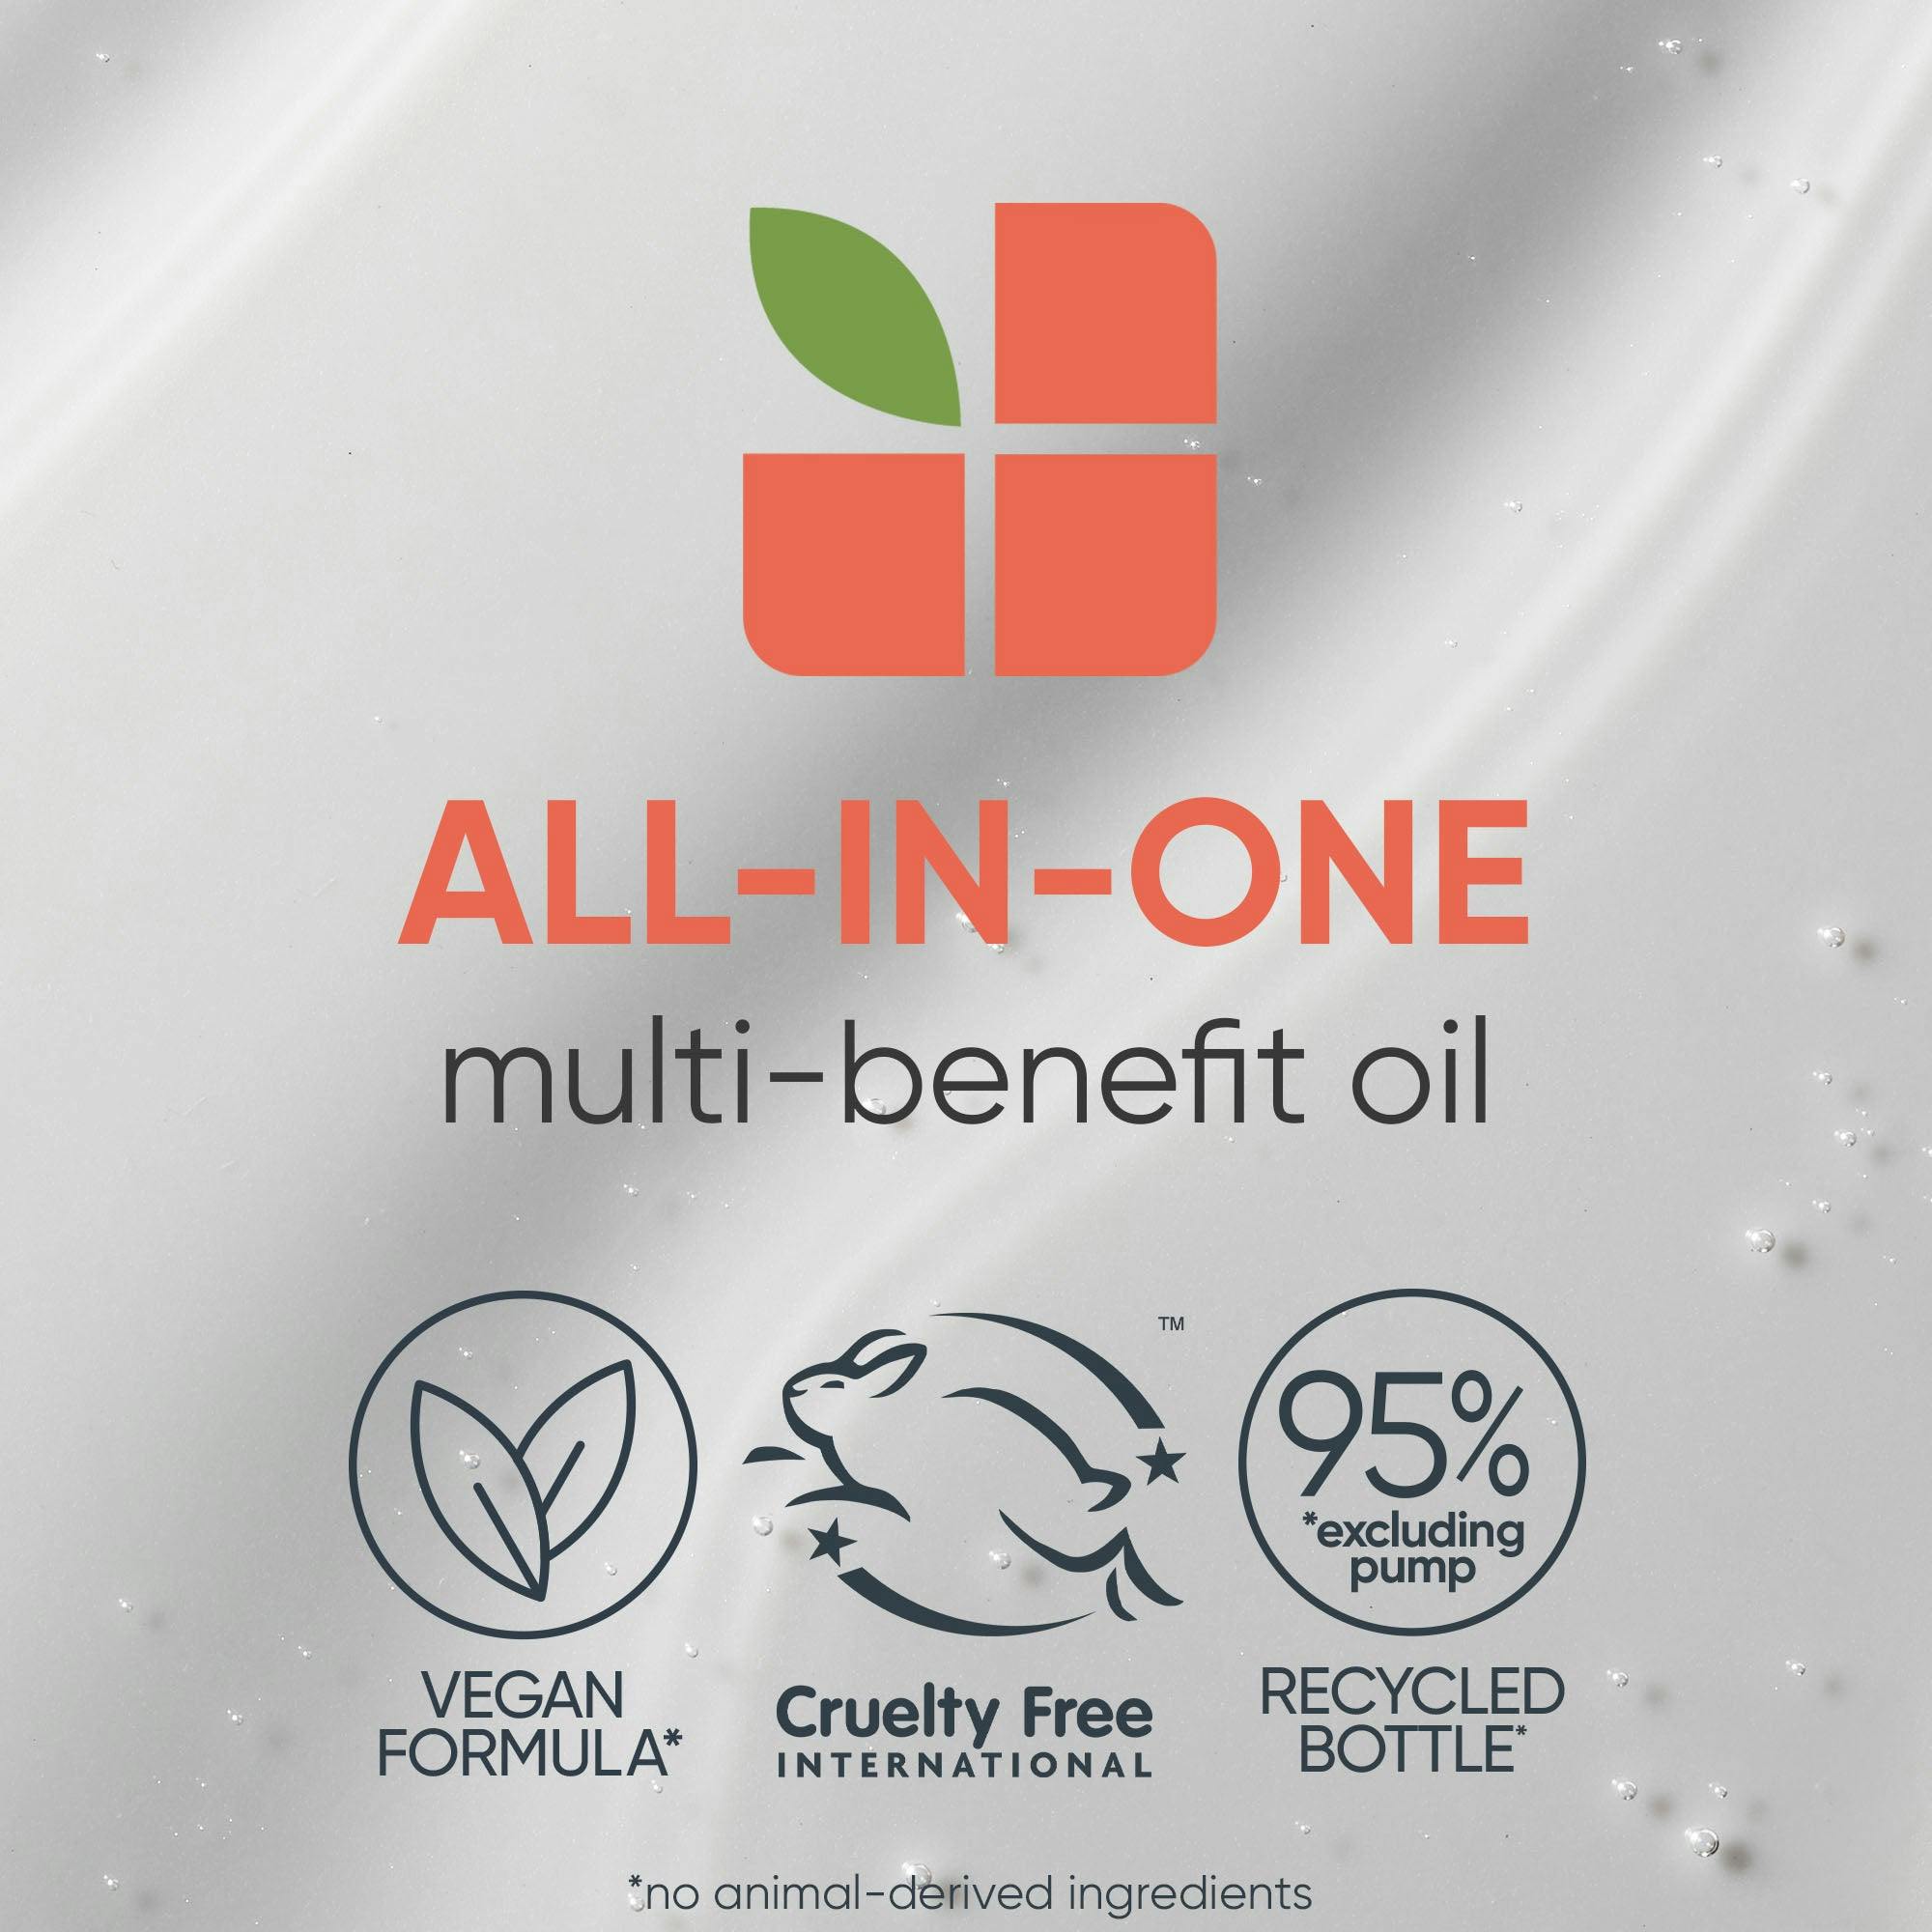 Biolage All-In-One Multi-Benefit Oil 89ml